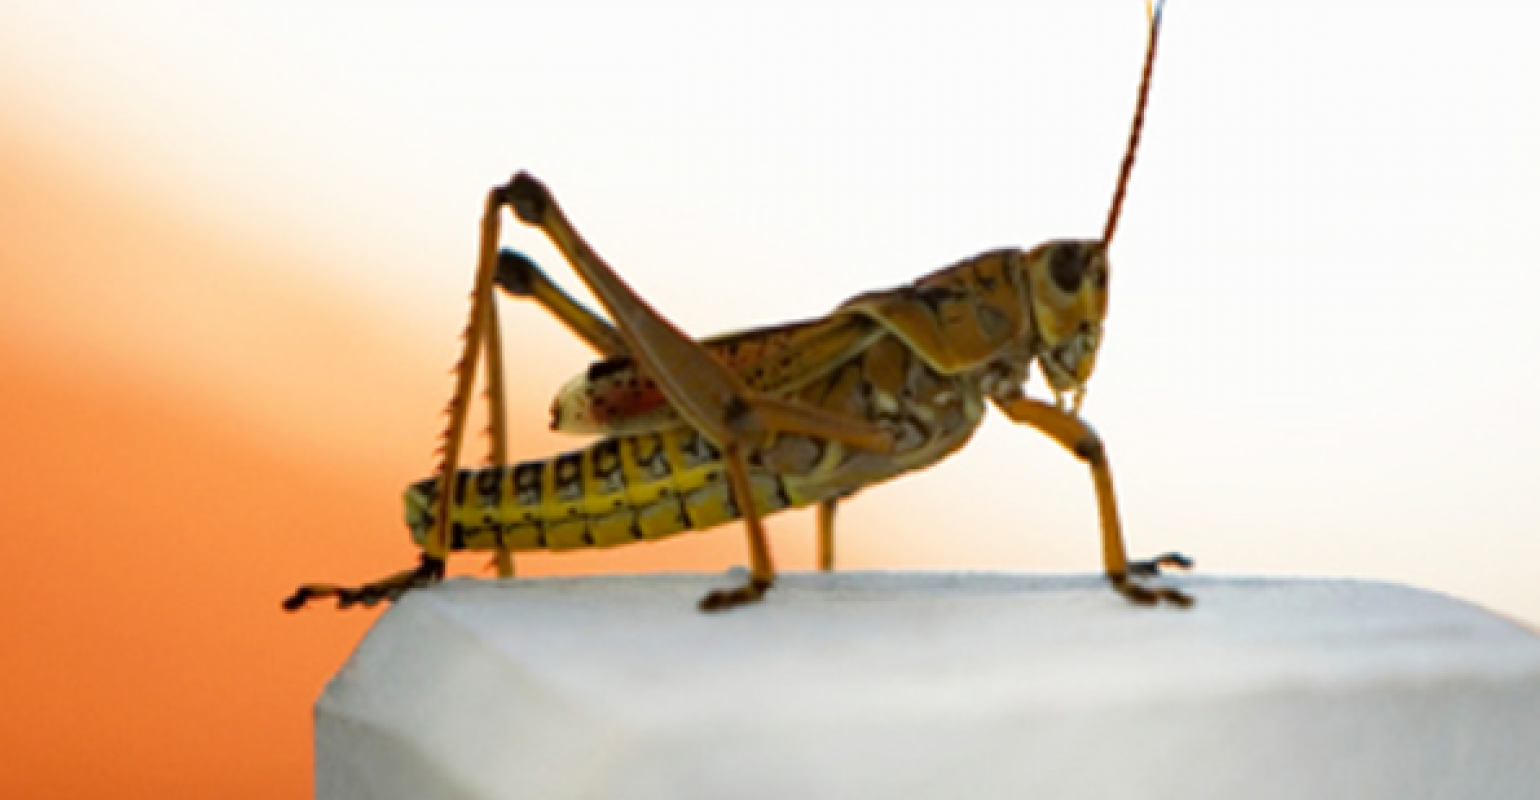 Grasshoppers and Crickets – Fly Fishing Science